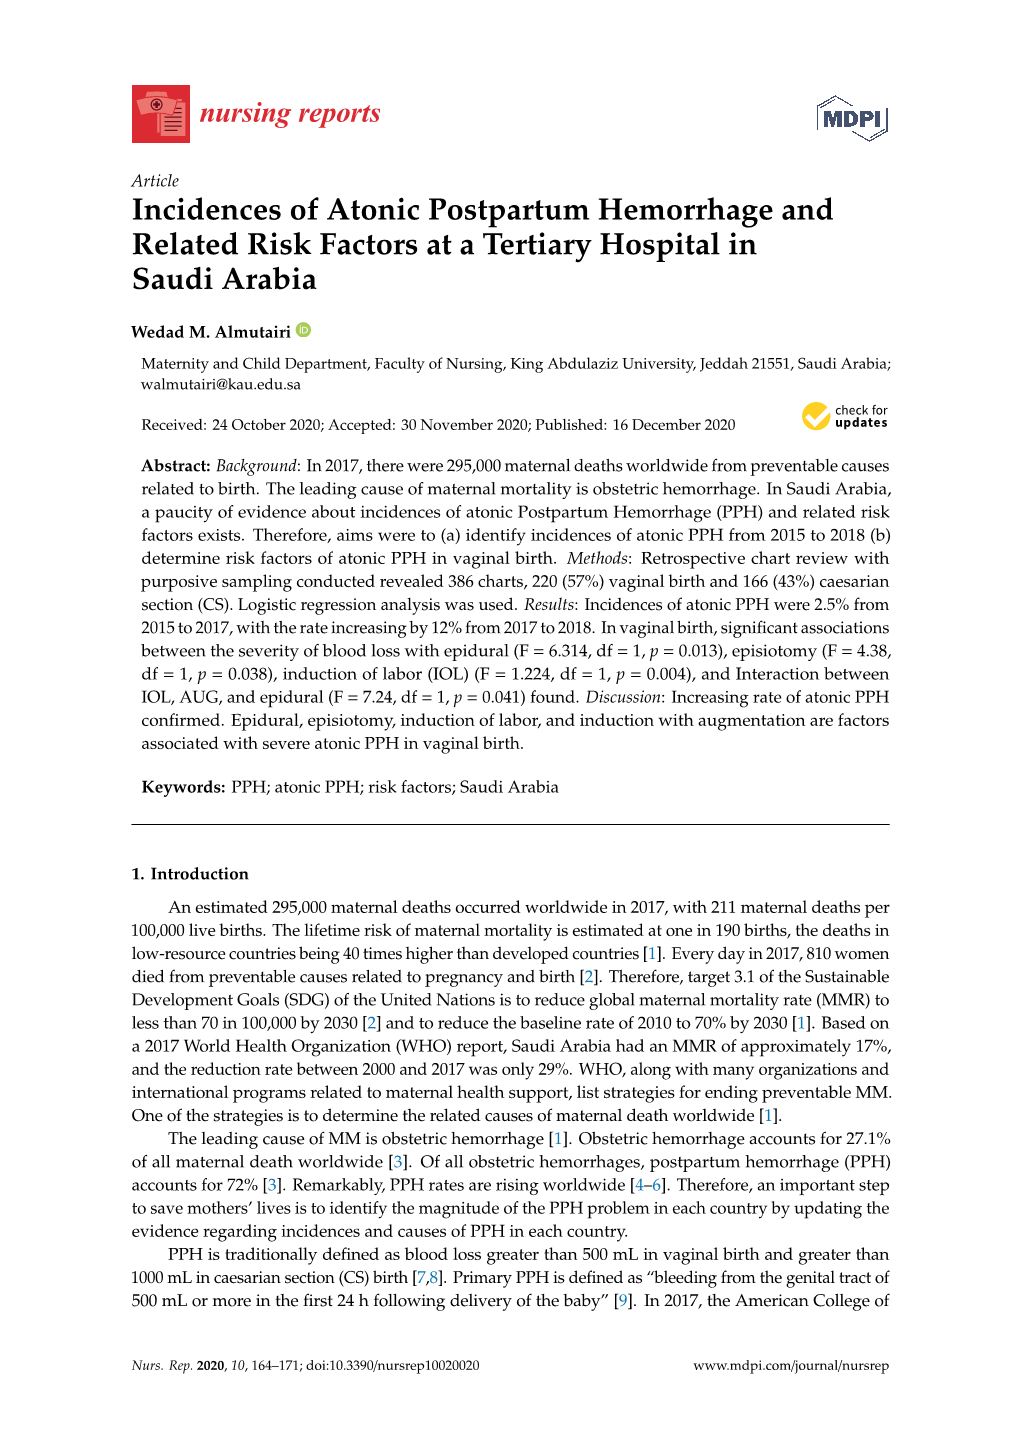 Incidences of Atonic Postpartum Hemorrhage and Related Risk Factors at a Tertiary Hospital in Saudi Arabia